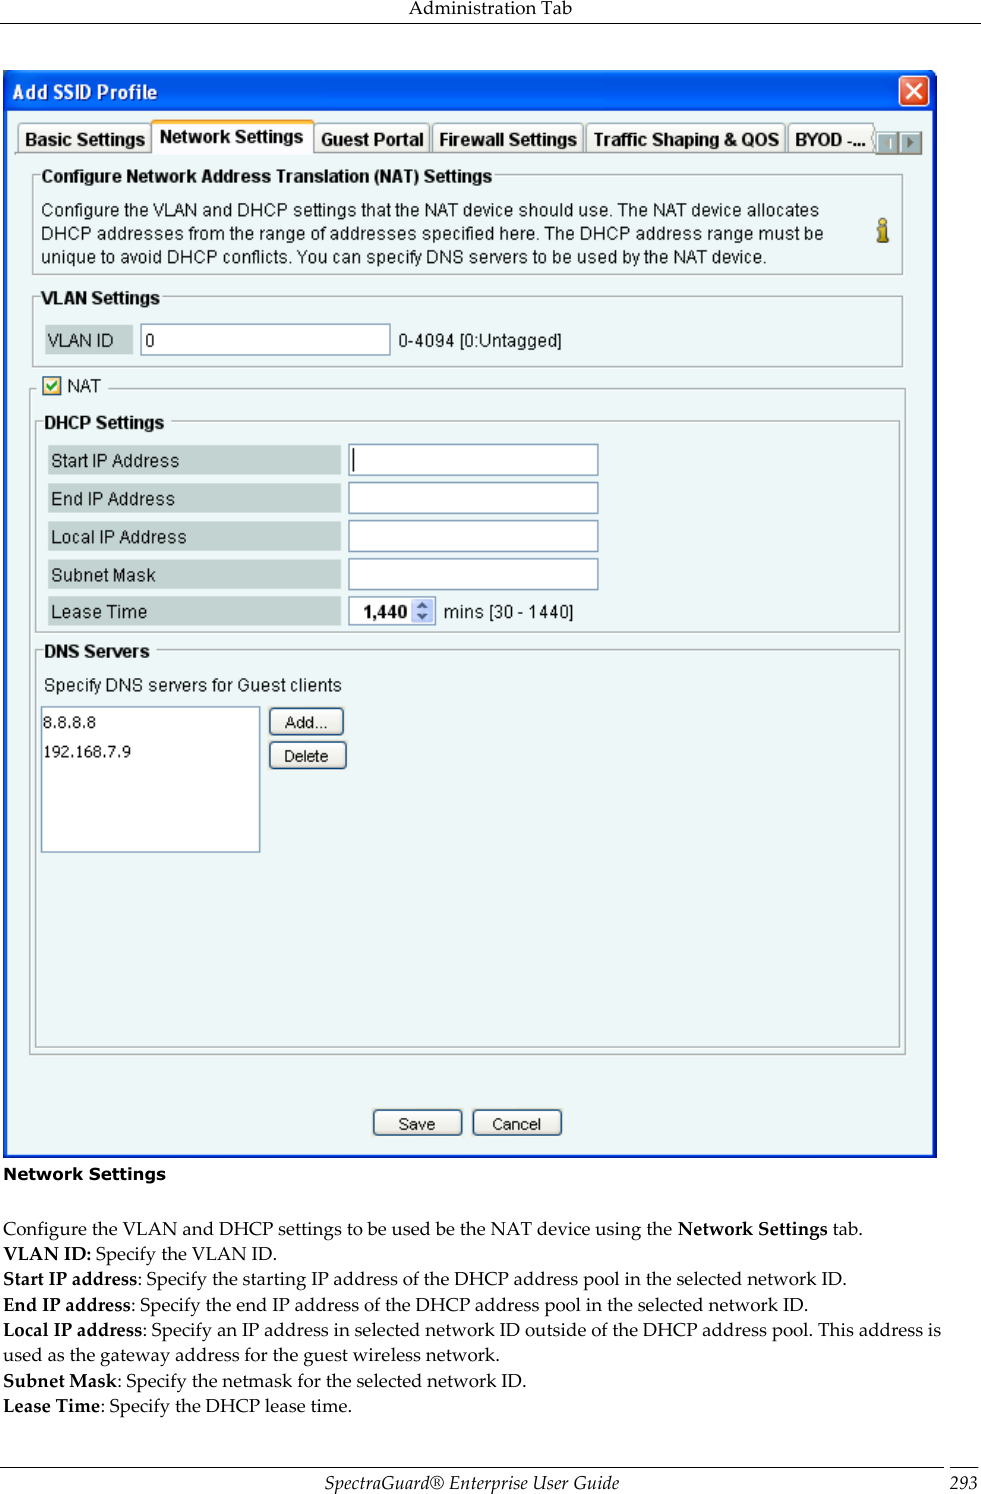 Administration Tab SpectraGuard®  Enterprise User Guide 293  Network Settings   Configure the VLAN and DHCP settings to be used be the NAT device using the Network Settings tab. VLAN ID: Specify the VLAN ID. Start IP address: Specify the starting IP address of the DHCP address pool in the selected network ID. End IP address: Specify the end IP address of the DHCP address pool in the selected network ID. Local IP address: Specify an IP address in selected network ID outside of the DHCP address pool. This address is used as the gateway address for the guest wireless network. Subnet Mask: Specify the netmask for the selected network ID. Lease Time: Specify the DHCP lease time. 